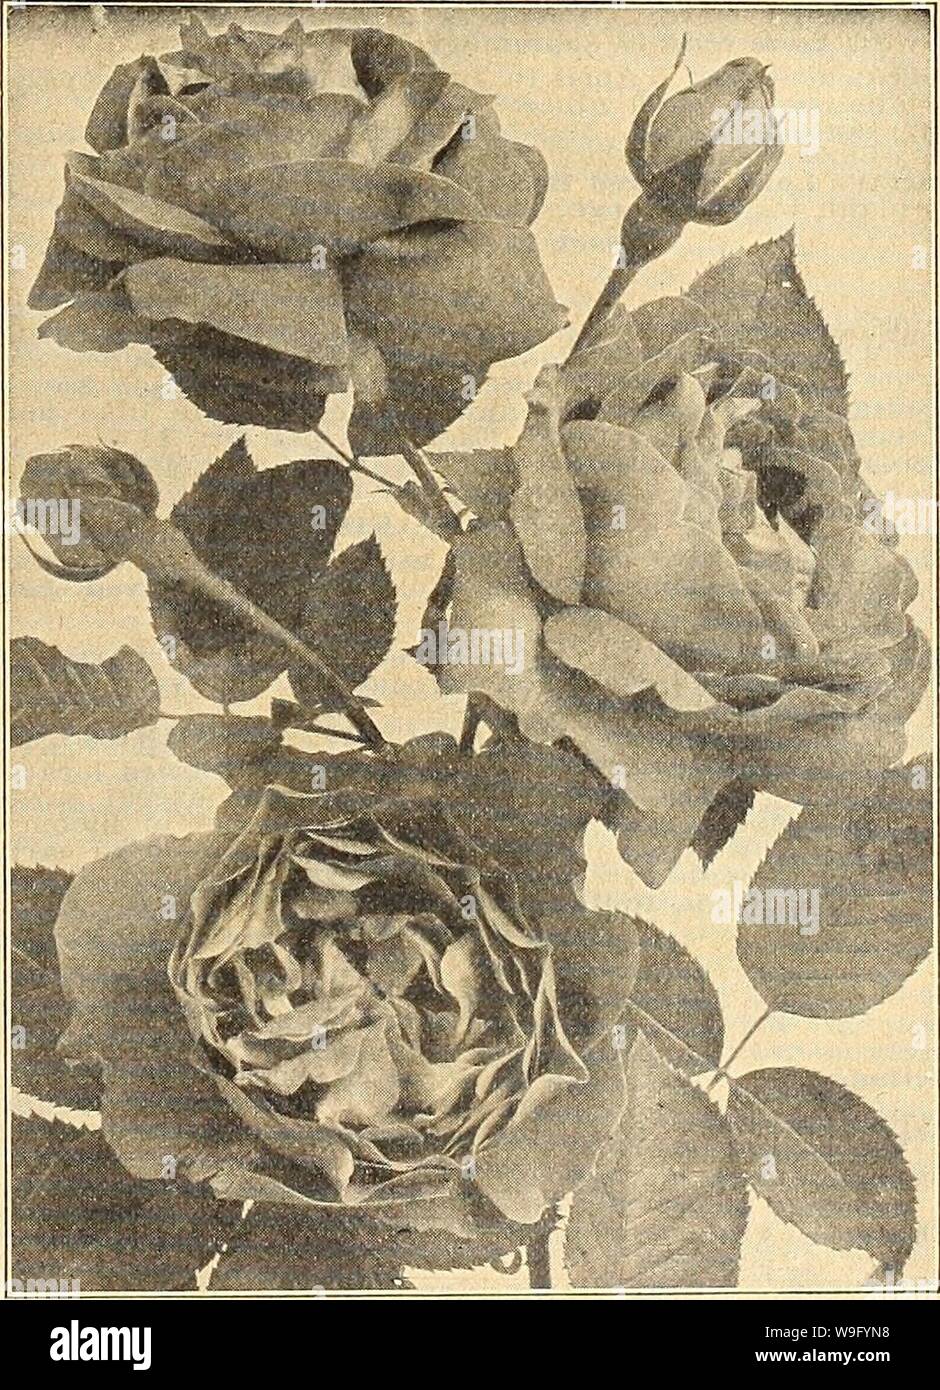 Archive image from page 84 of Currie's farm & garden annual. Currie's farm & garden annual : spring 1922 47th year  curriesfarmgarde19curr 5 Year: 1922 ( ROSES Dwarf Fruiting Orange. Dwarf OrangeâA true Orange, bearing masses of waxy-white fragrant blos- soms followed by bright colored, very sweet fruit. Plants bloom and bear fruit when only five and six inches high. Nice plants, 30c each; large plants, 50c and $1.00. Fuchsia, Gloire des JIarches. THE BEST FUCHSIAS. PhenomenalâBright scarlet flowers with rich purple corolla; very double. Wave of LifeâGolden foliage, flowers dark purple, single Stock Photo